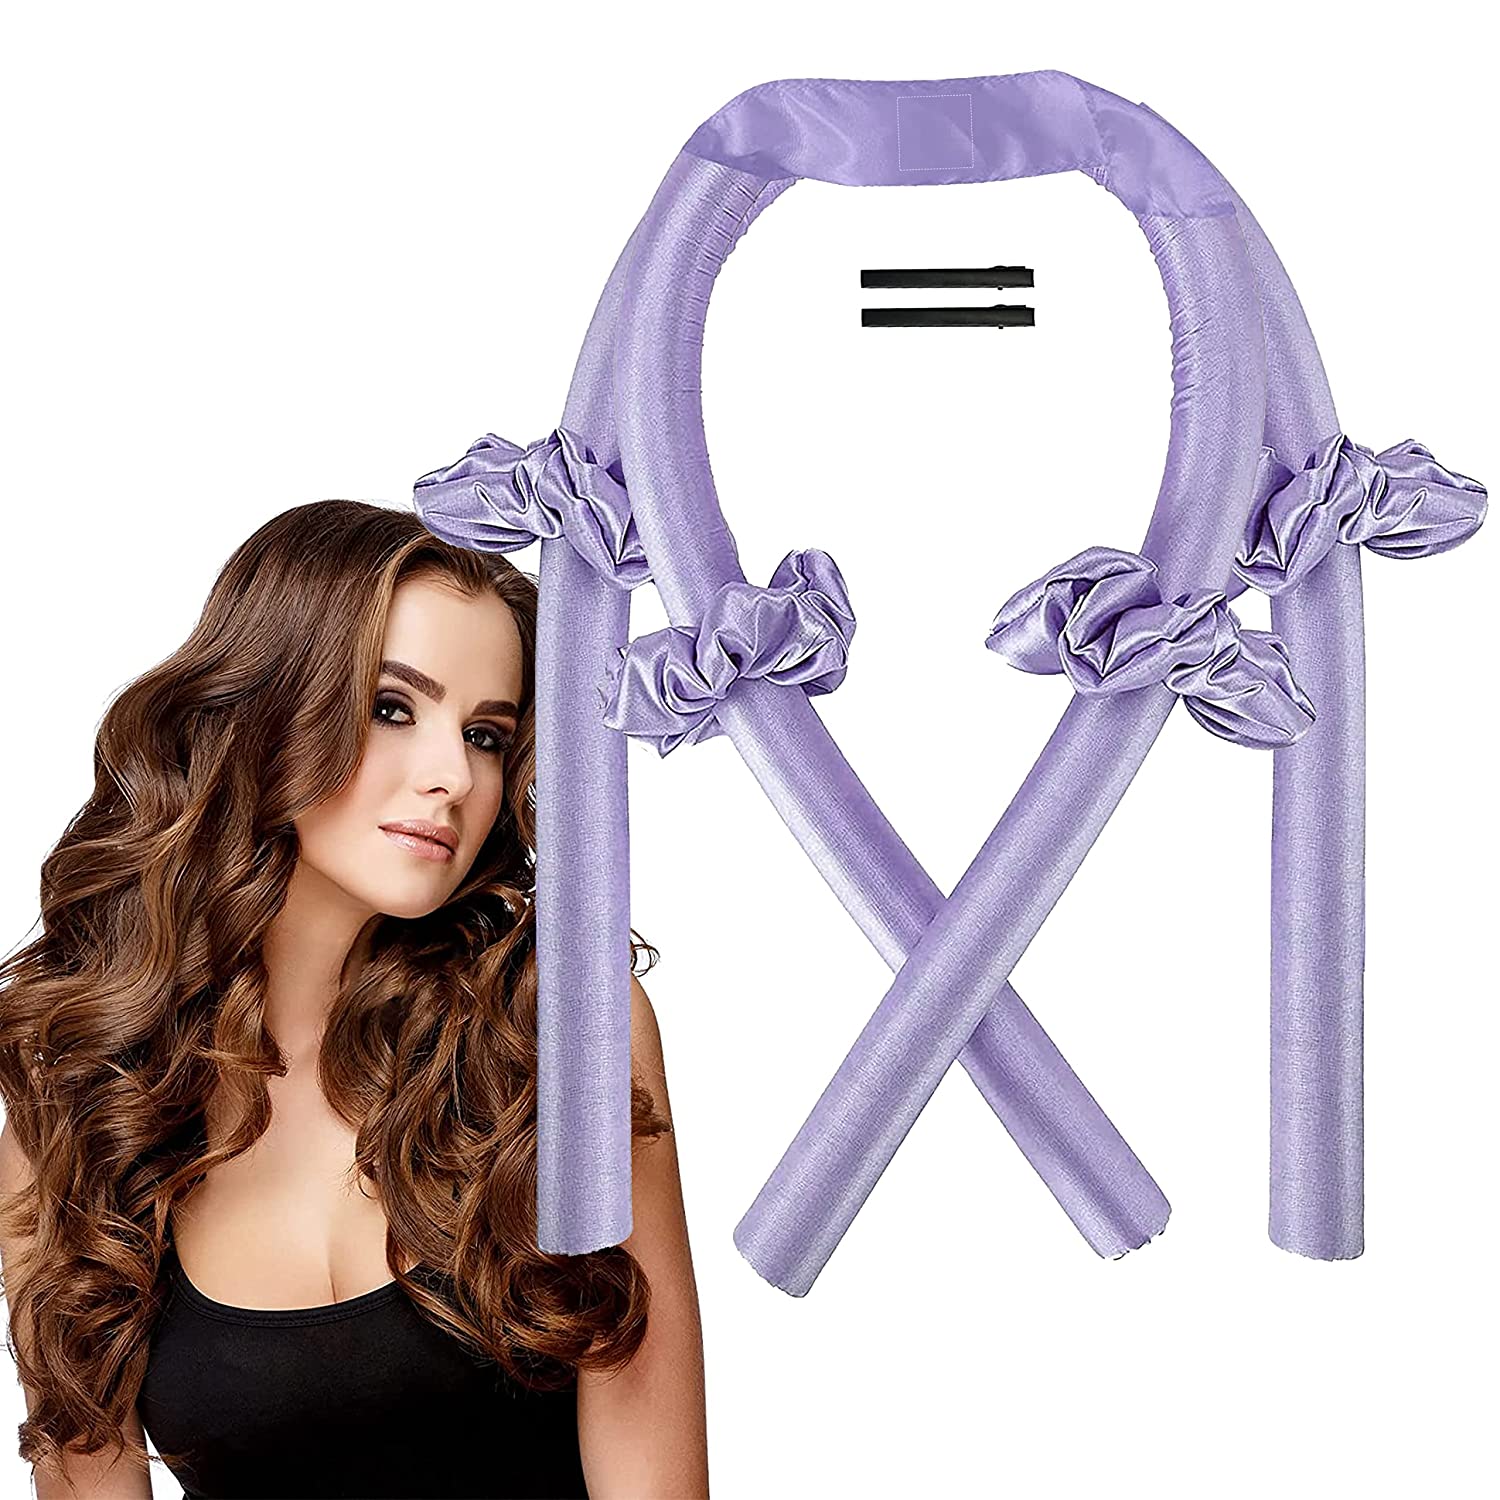 Swithun Curls without Heat for Long Hair, Non-Slip Heatless Curls Band Silk Hair Curler with Hairpin, Wave Formers Overnight, Hair Curler No Heat DIY Hairstyle Set (Purple), ‎purple